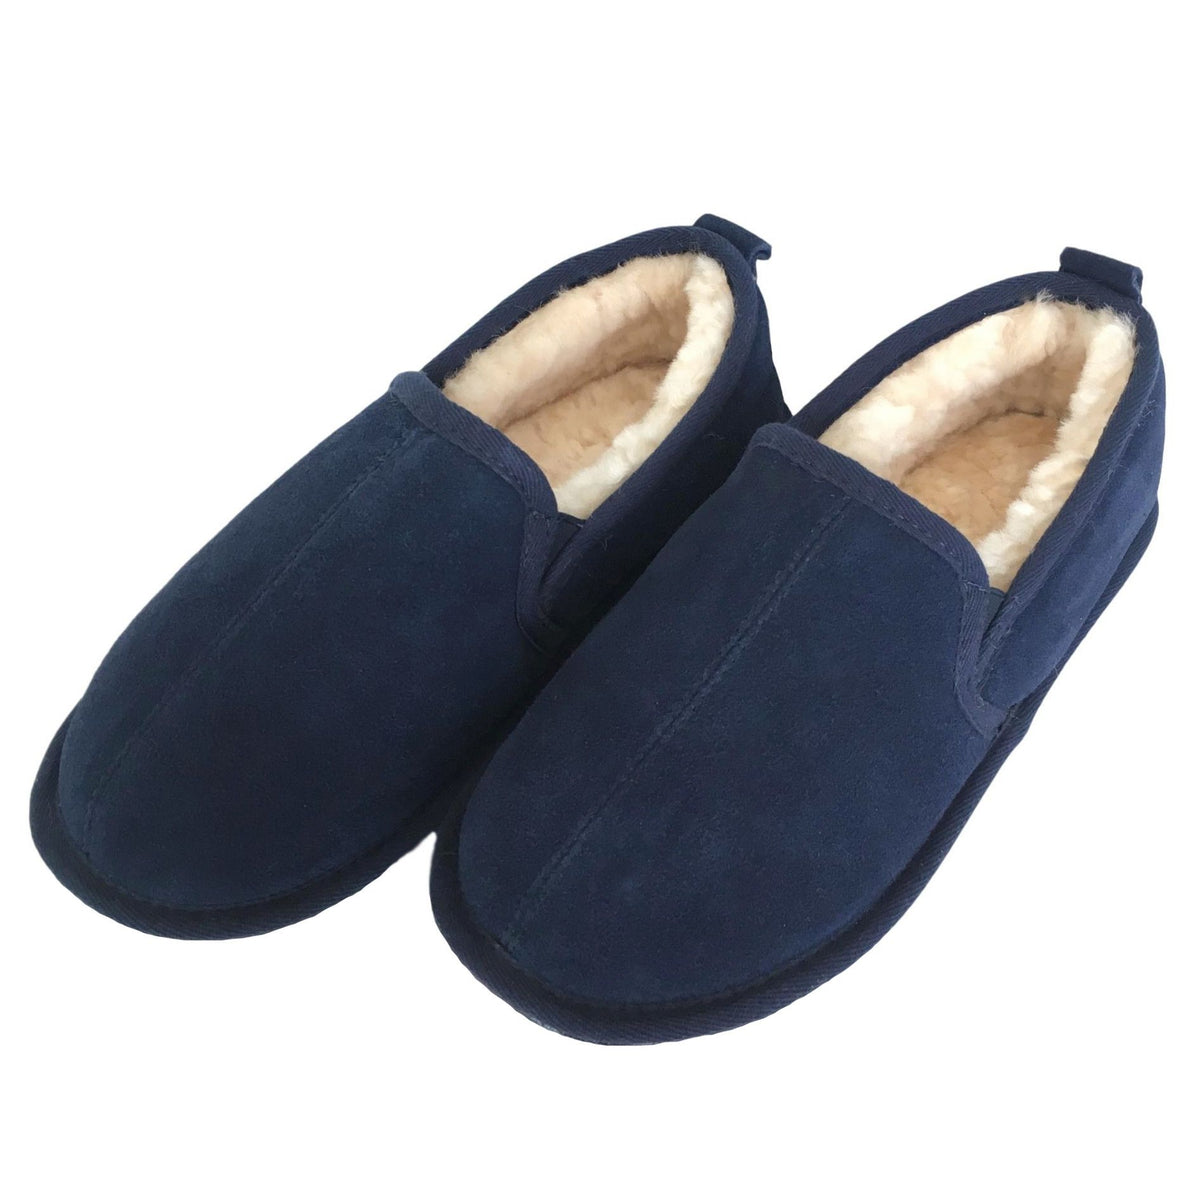 Shoes Stores Near Me: K Slippers